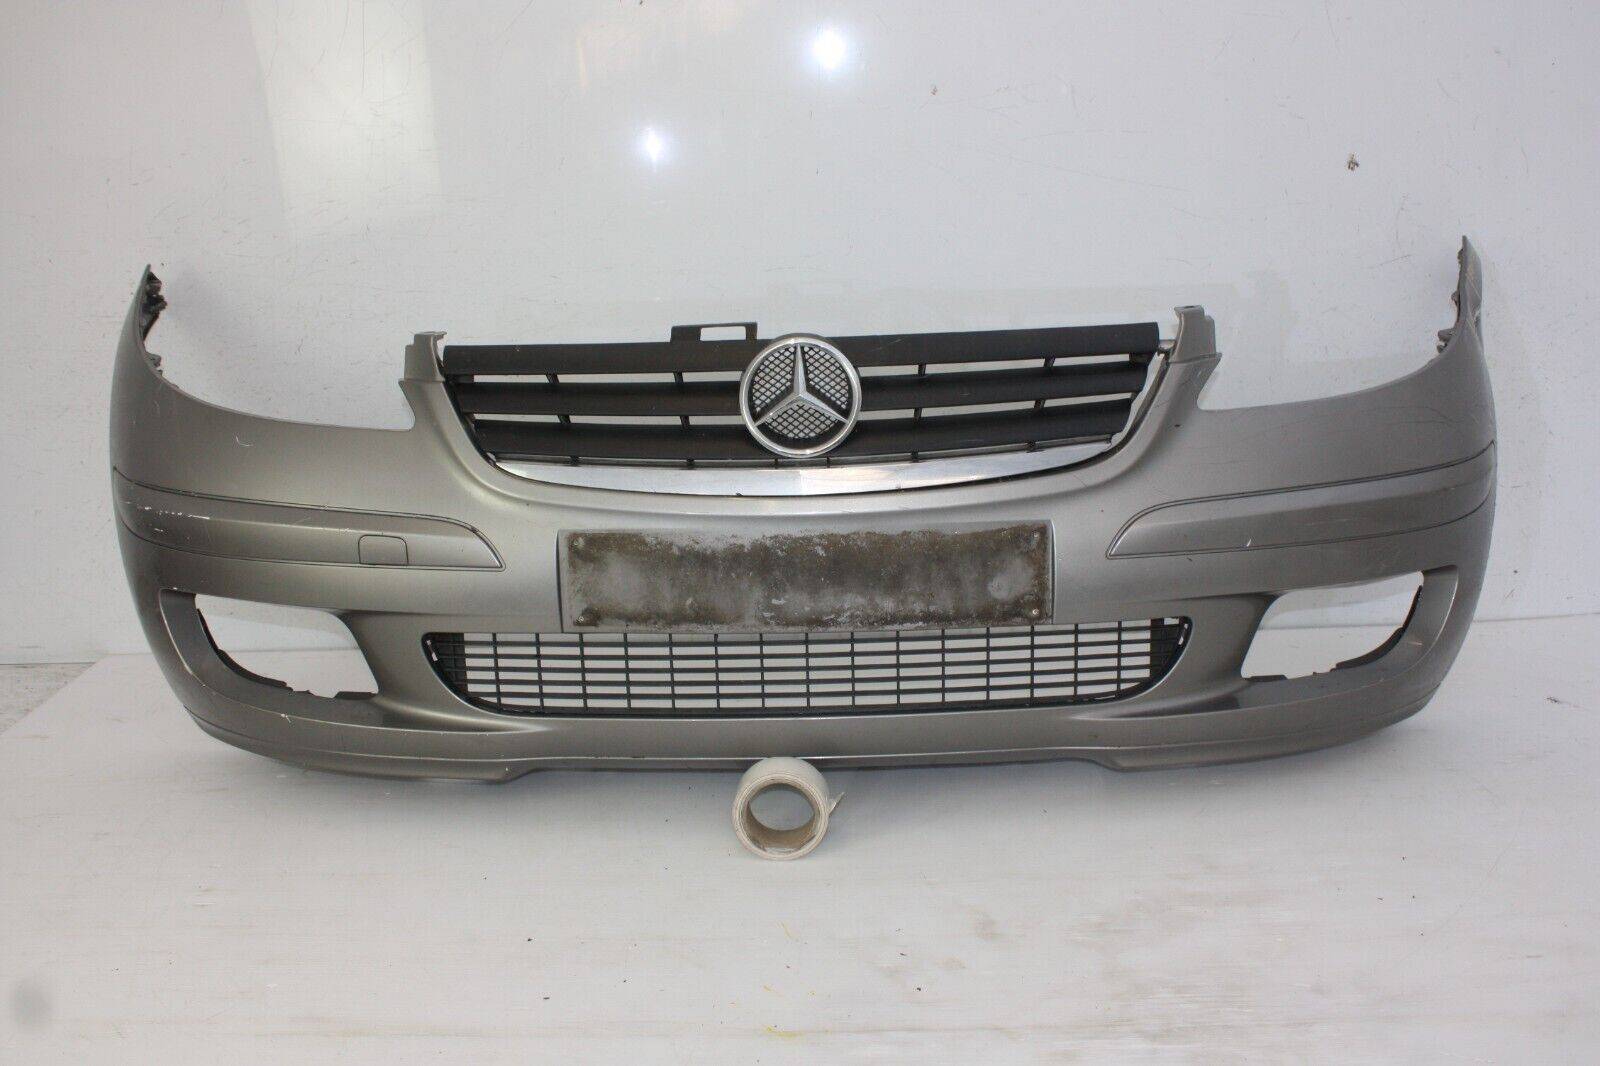 Mercedes A Class W169 Front Bumper 2005 TO 2008 Genuine SEE PICS 175594439592